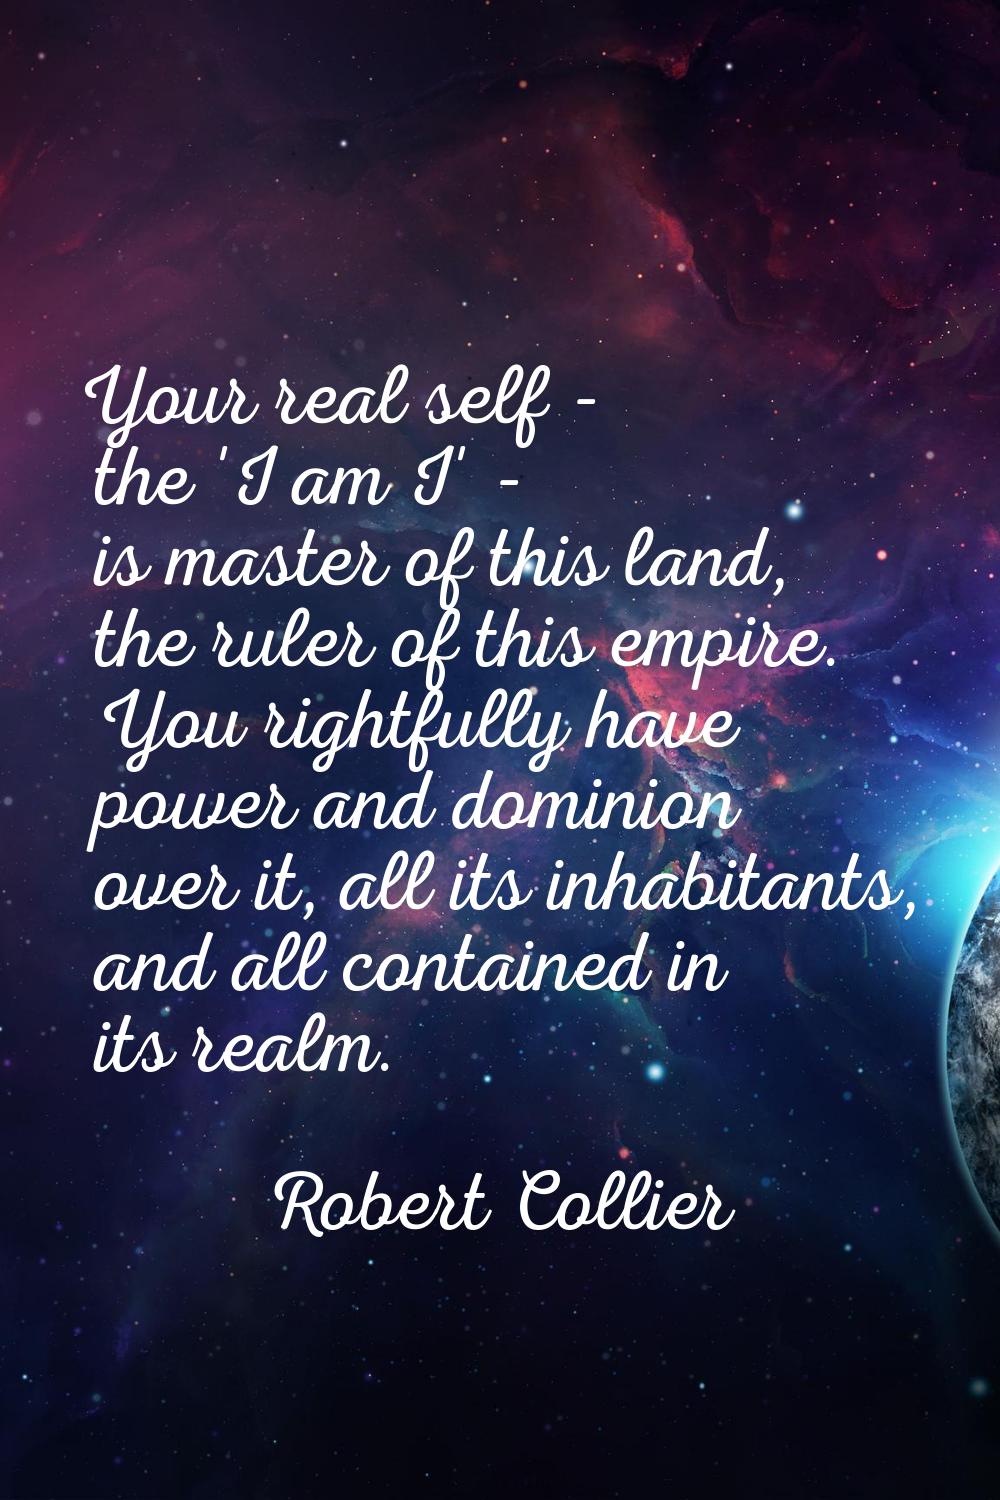 Your real self - the 'I am I' - is master of this land, the ruler of this empire. You rightfully ha